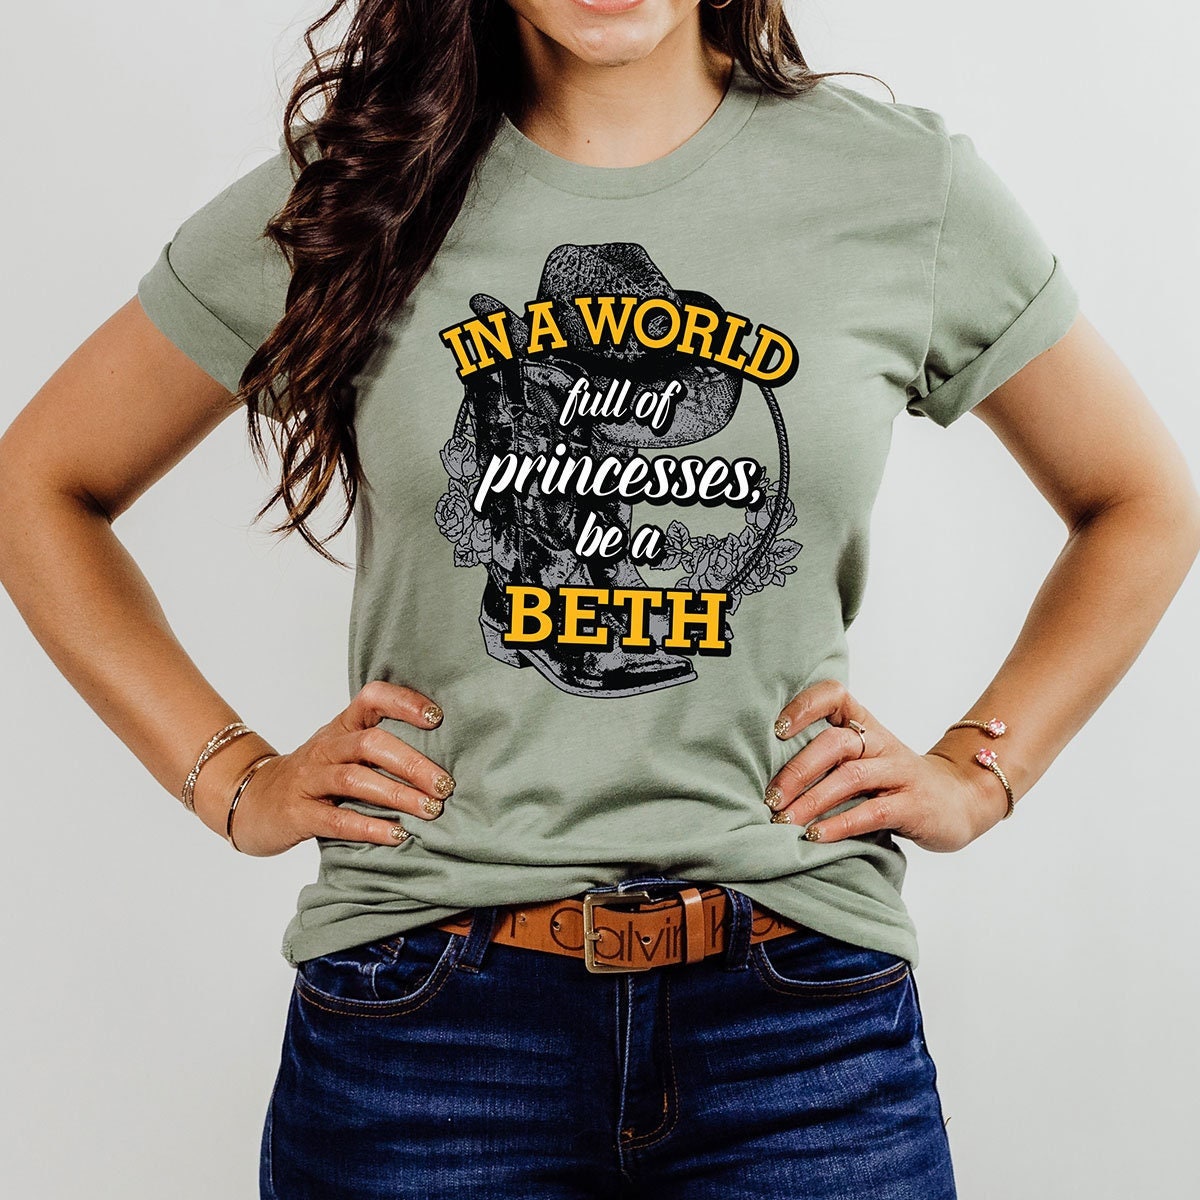 Beth Dutton T-shirt, Yellowstone TV Show Tee, in A World Full of Princesses  Be A Beth Shirt, Dutton Family Ranch, Montana Cowgirl Boots Hat -   Canada